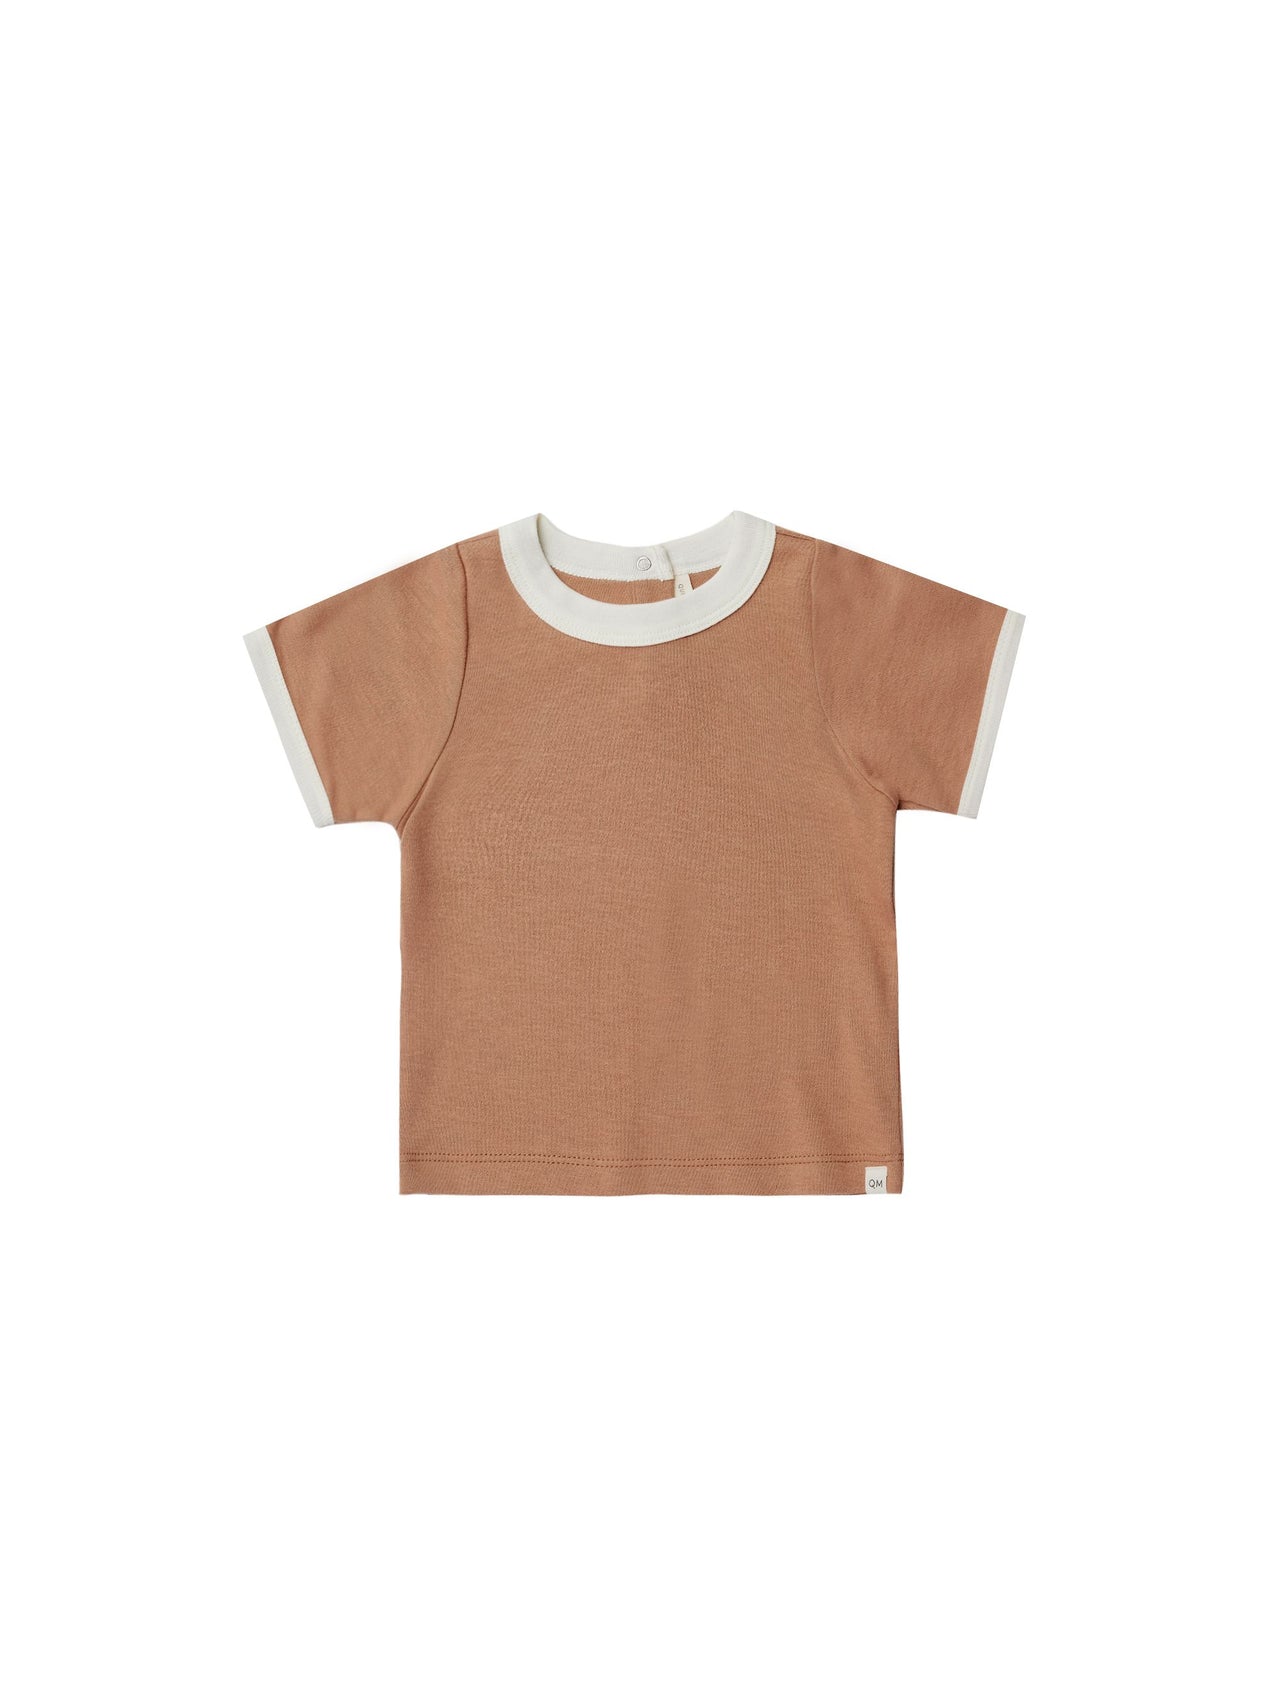 Quincy Mae Ringer Tee, Clay